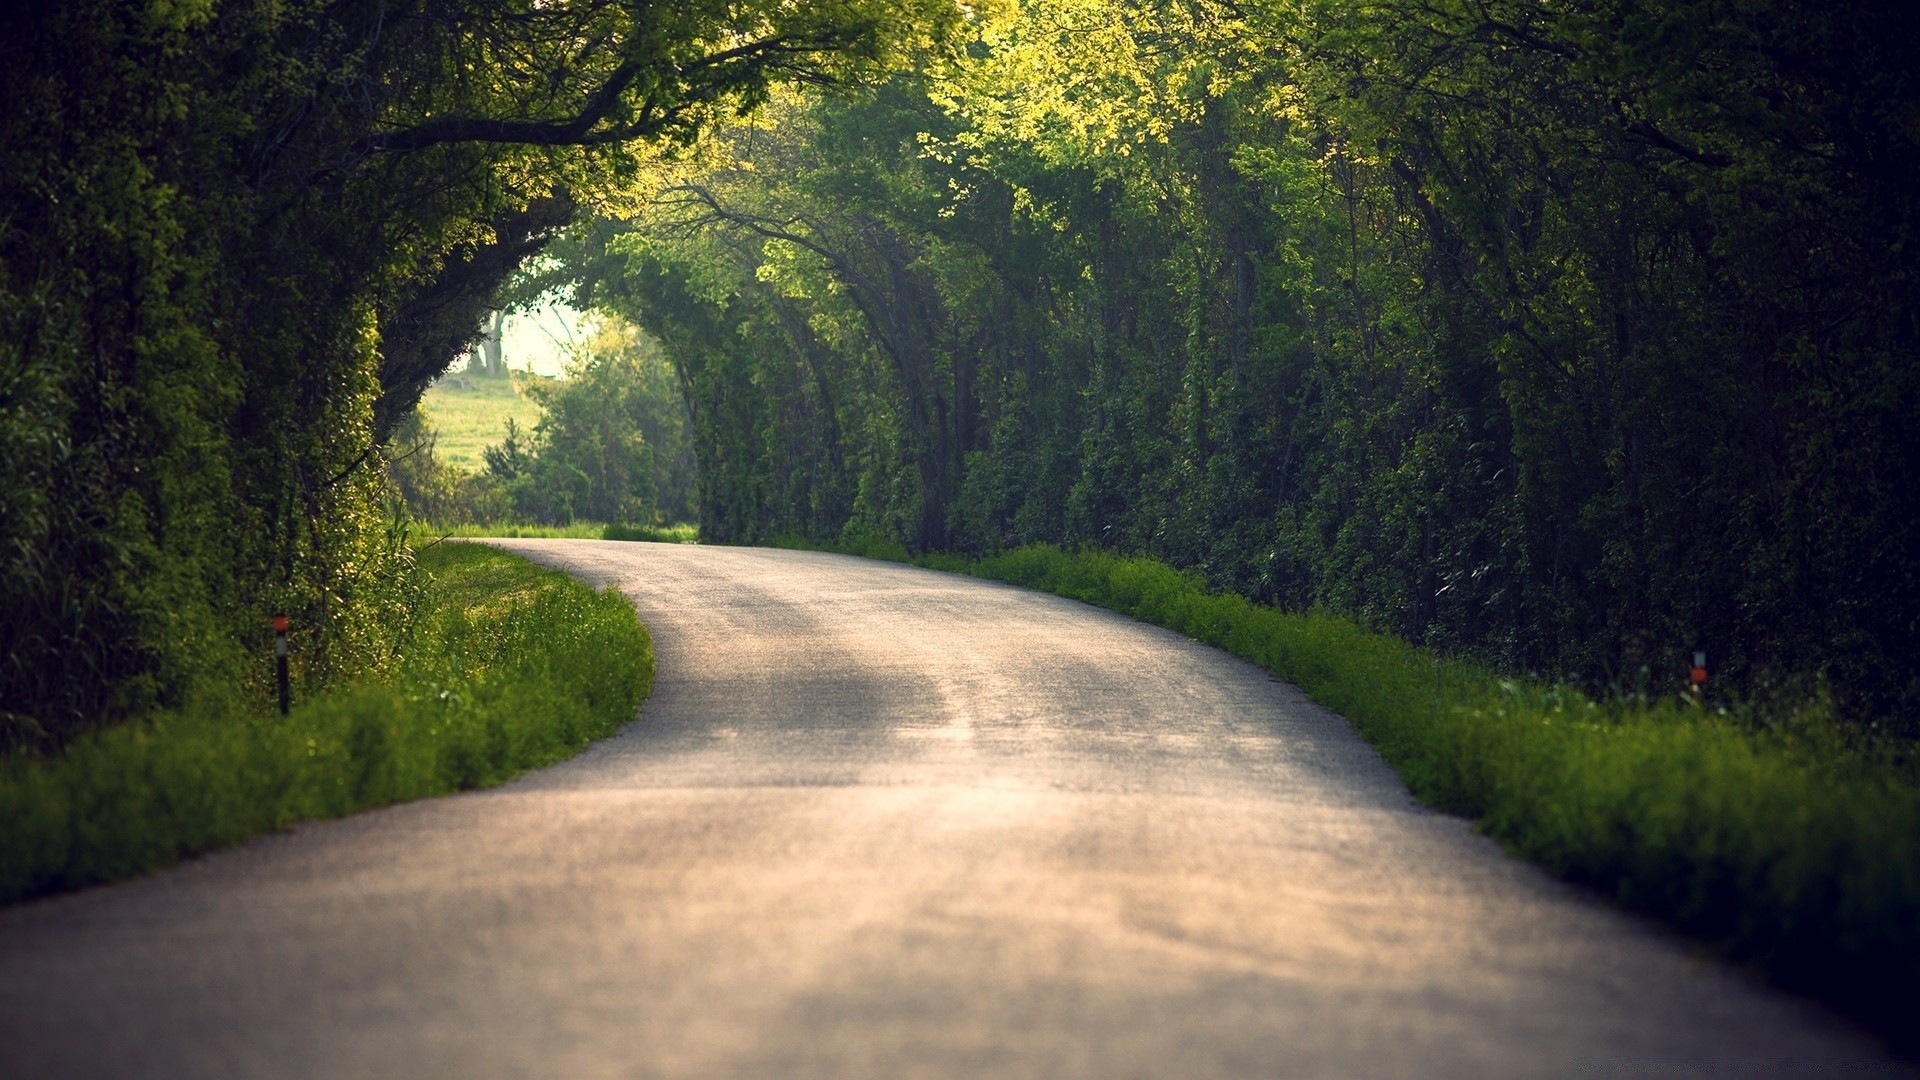 summer road tree landscape guidance wood nature dawn outdoors park countryside scenic travel fog grass